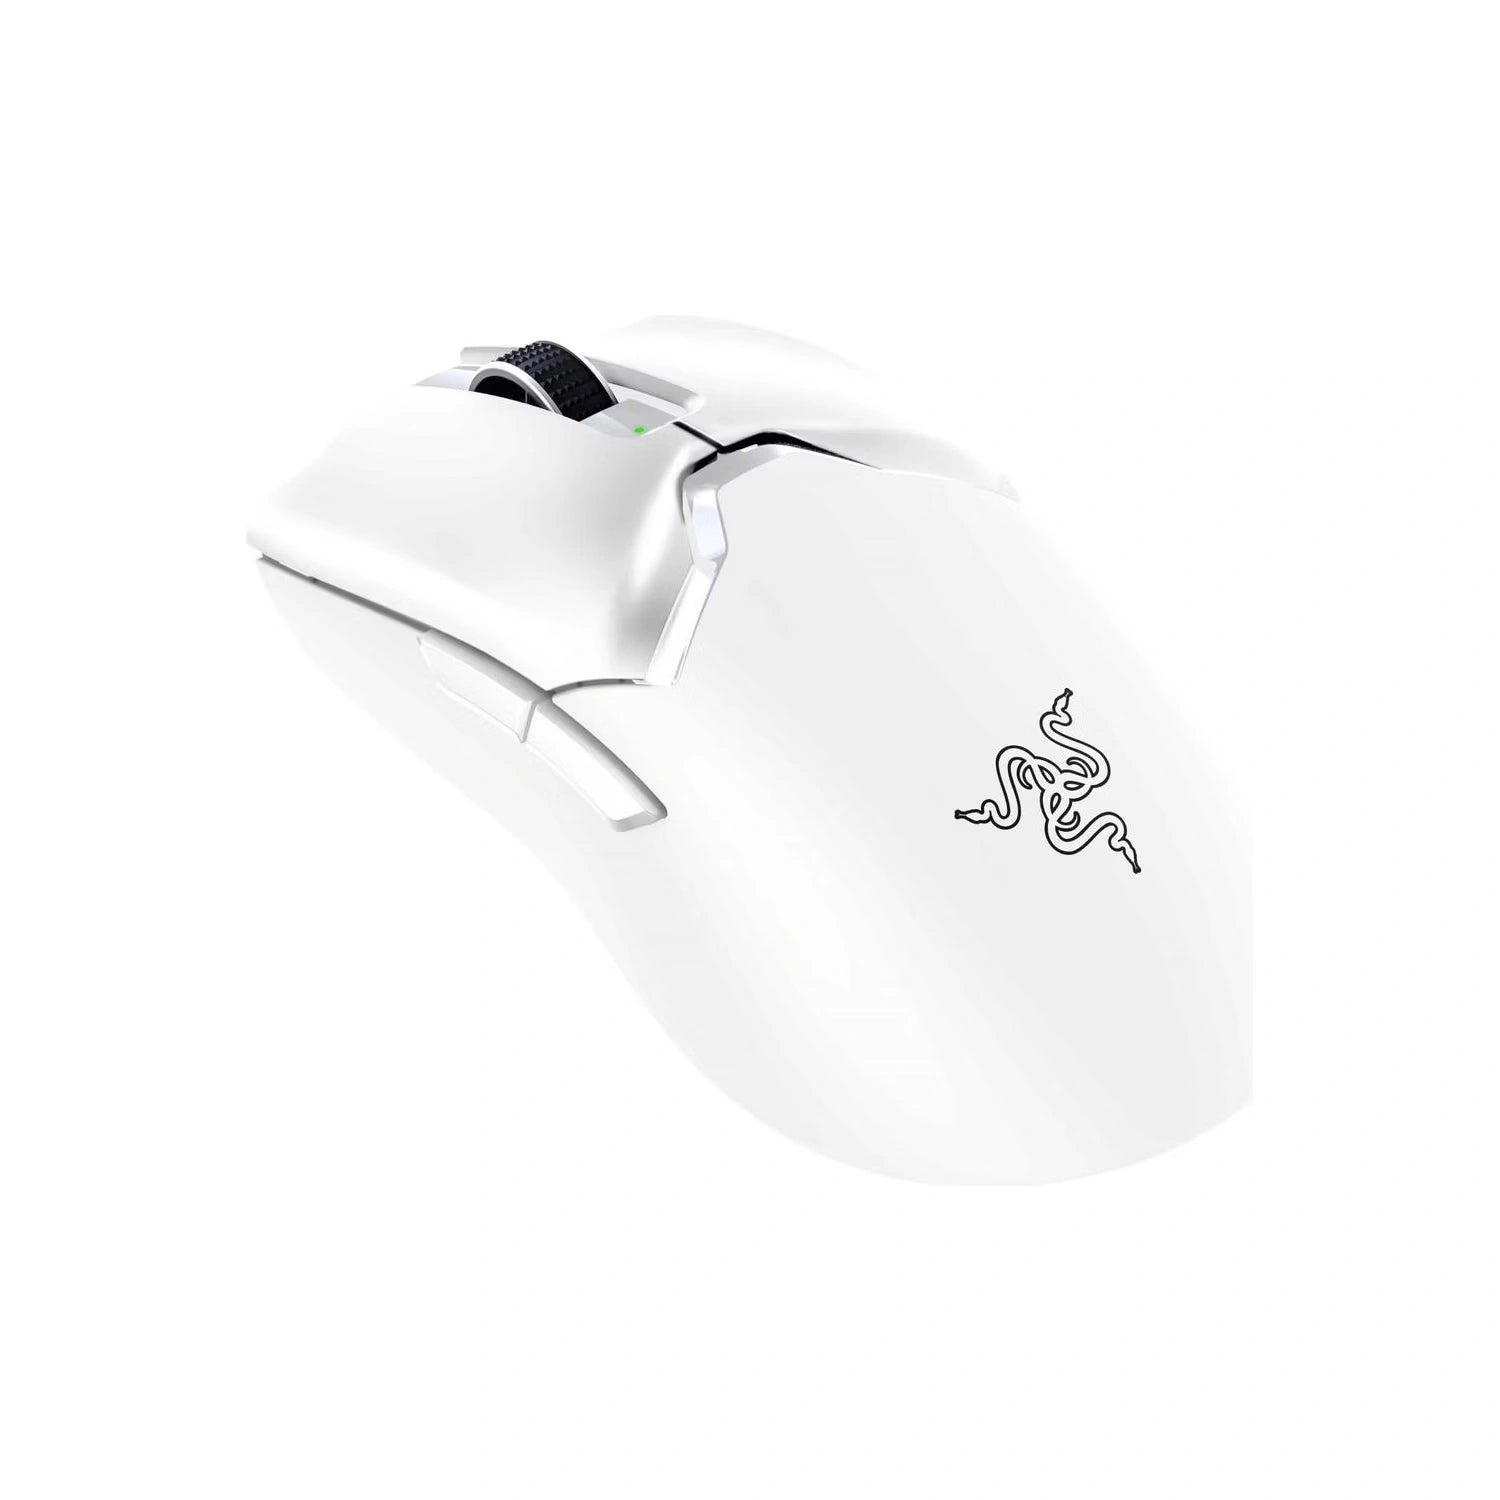 Razer Viper V2 Pro Hyperspeed Wireless Optical Gaming Mouse - White in Qatar